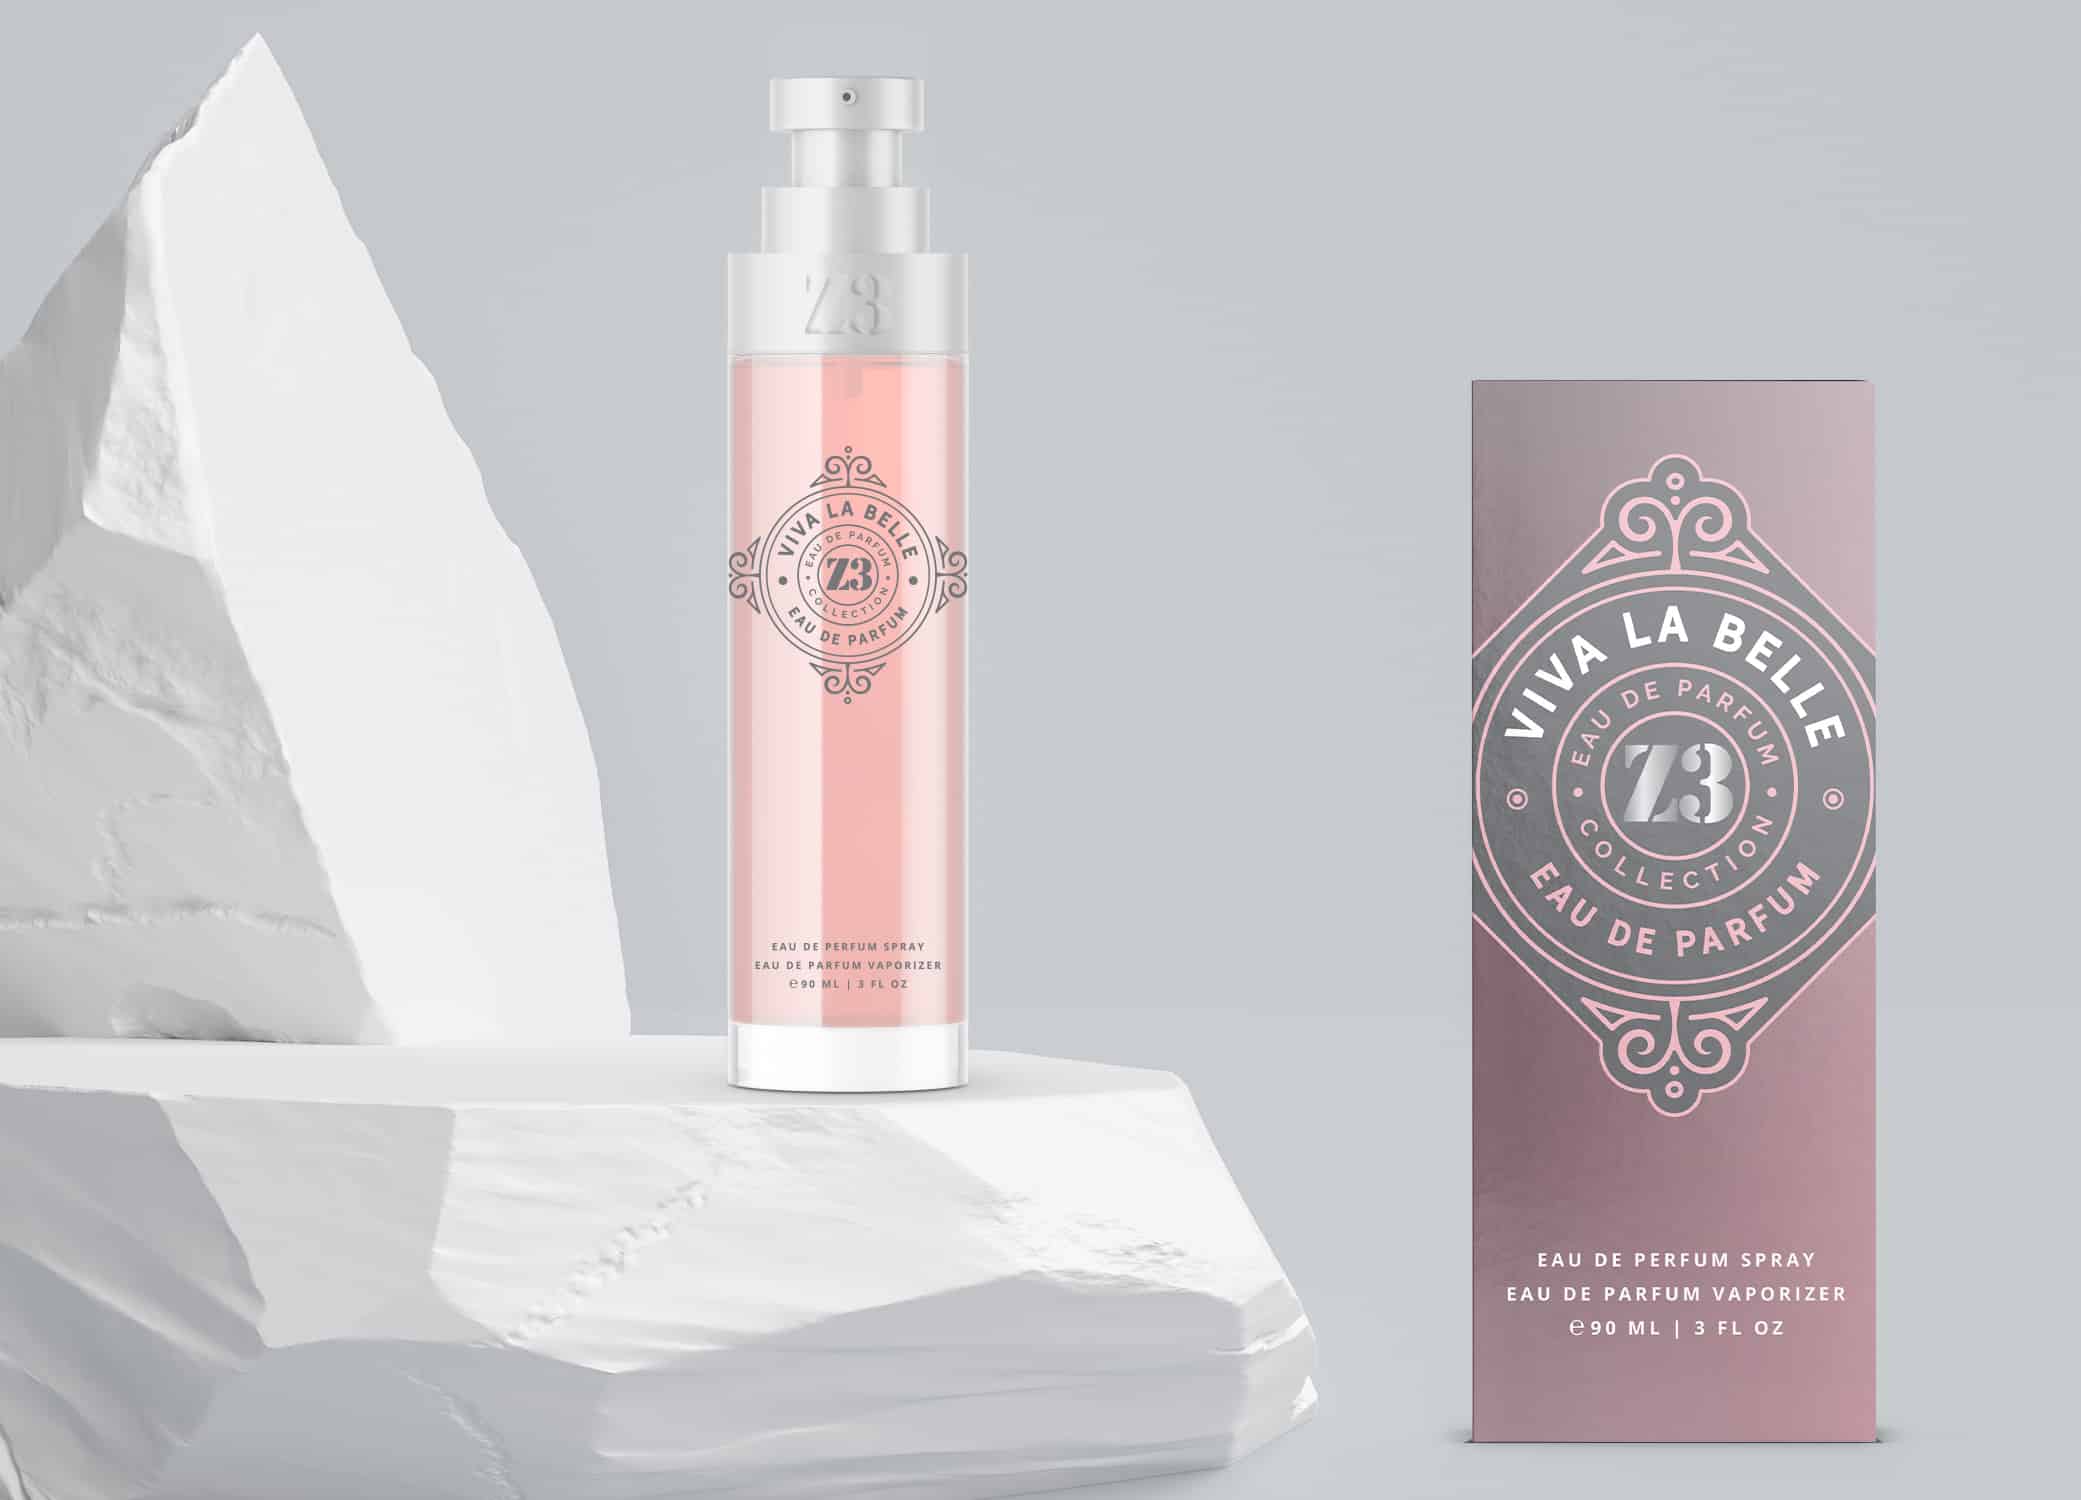 Luxury perfume packaging design for YZY in pink and charcoal with vintage emblem for Z3 Viva la Belle product.